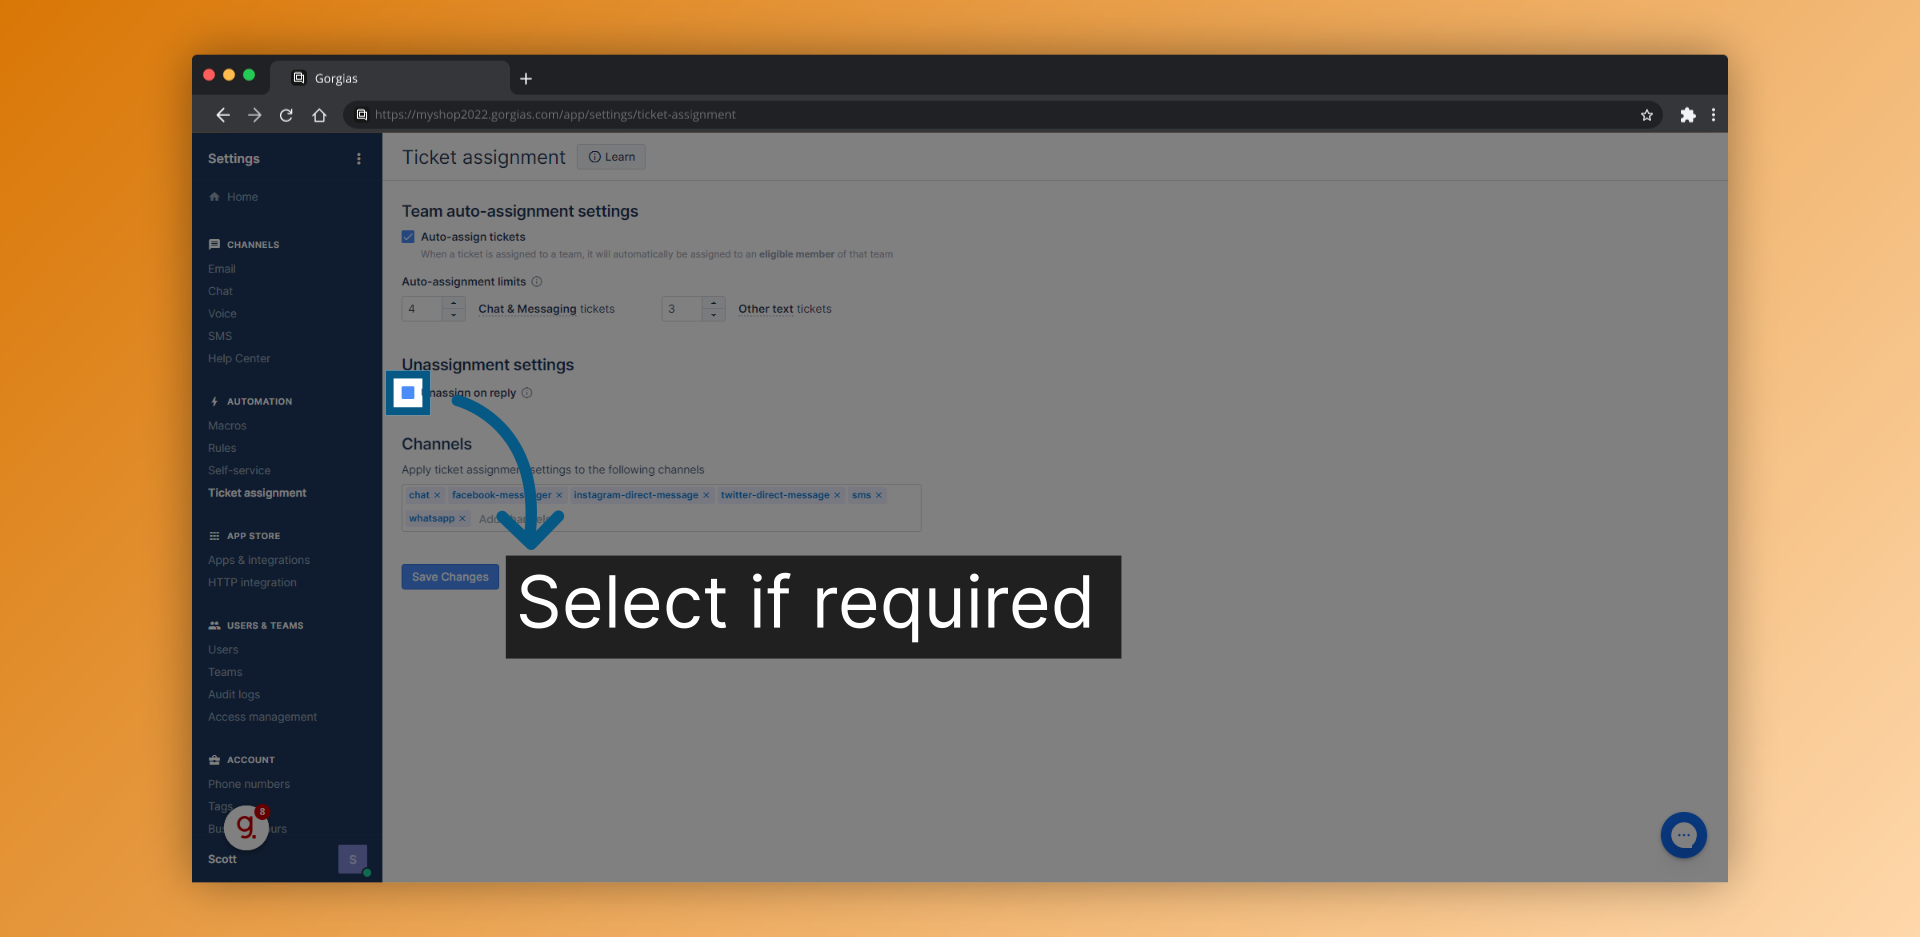 Select if required